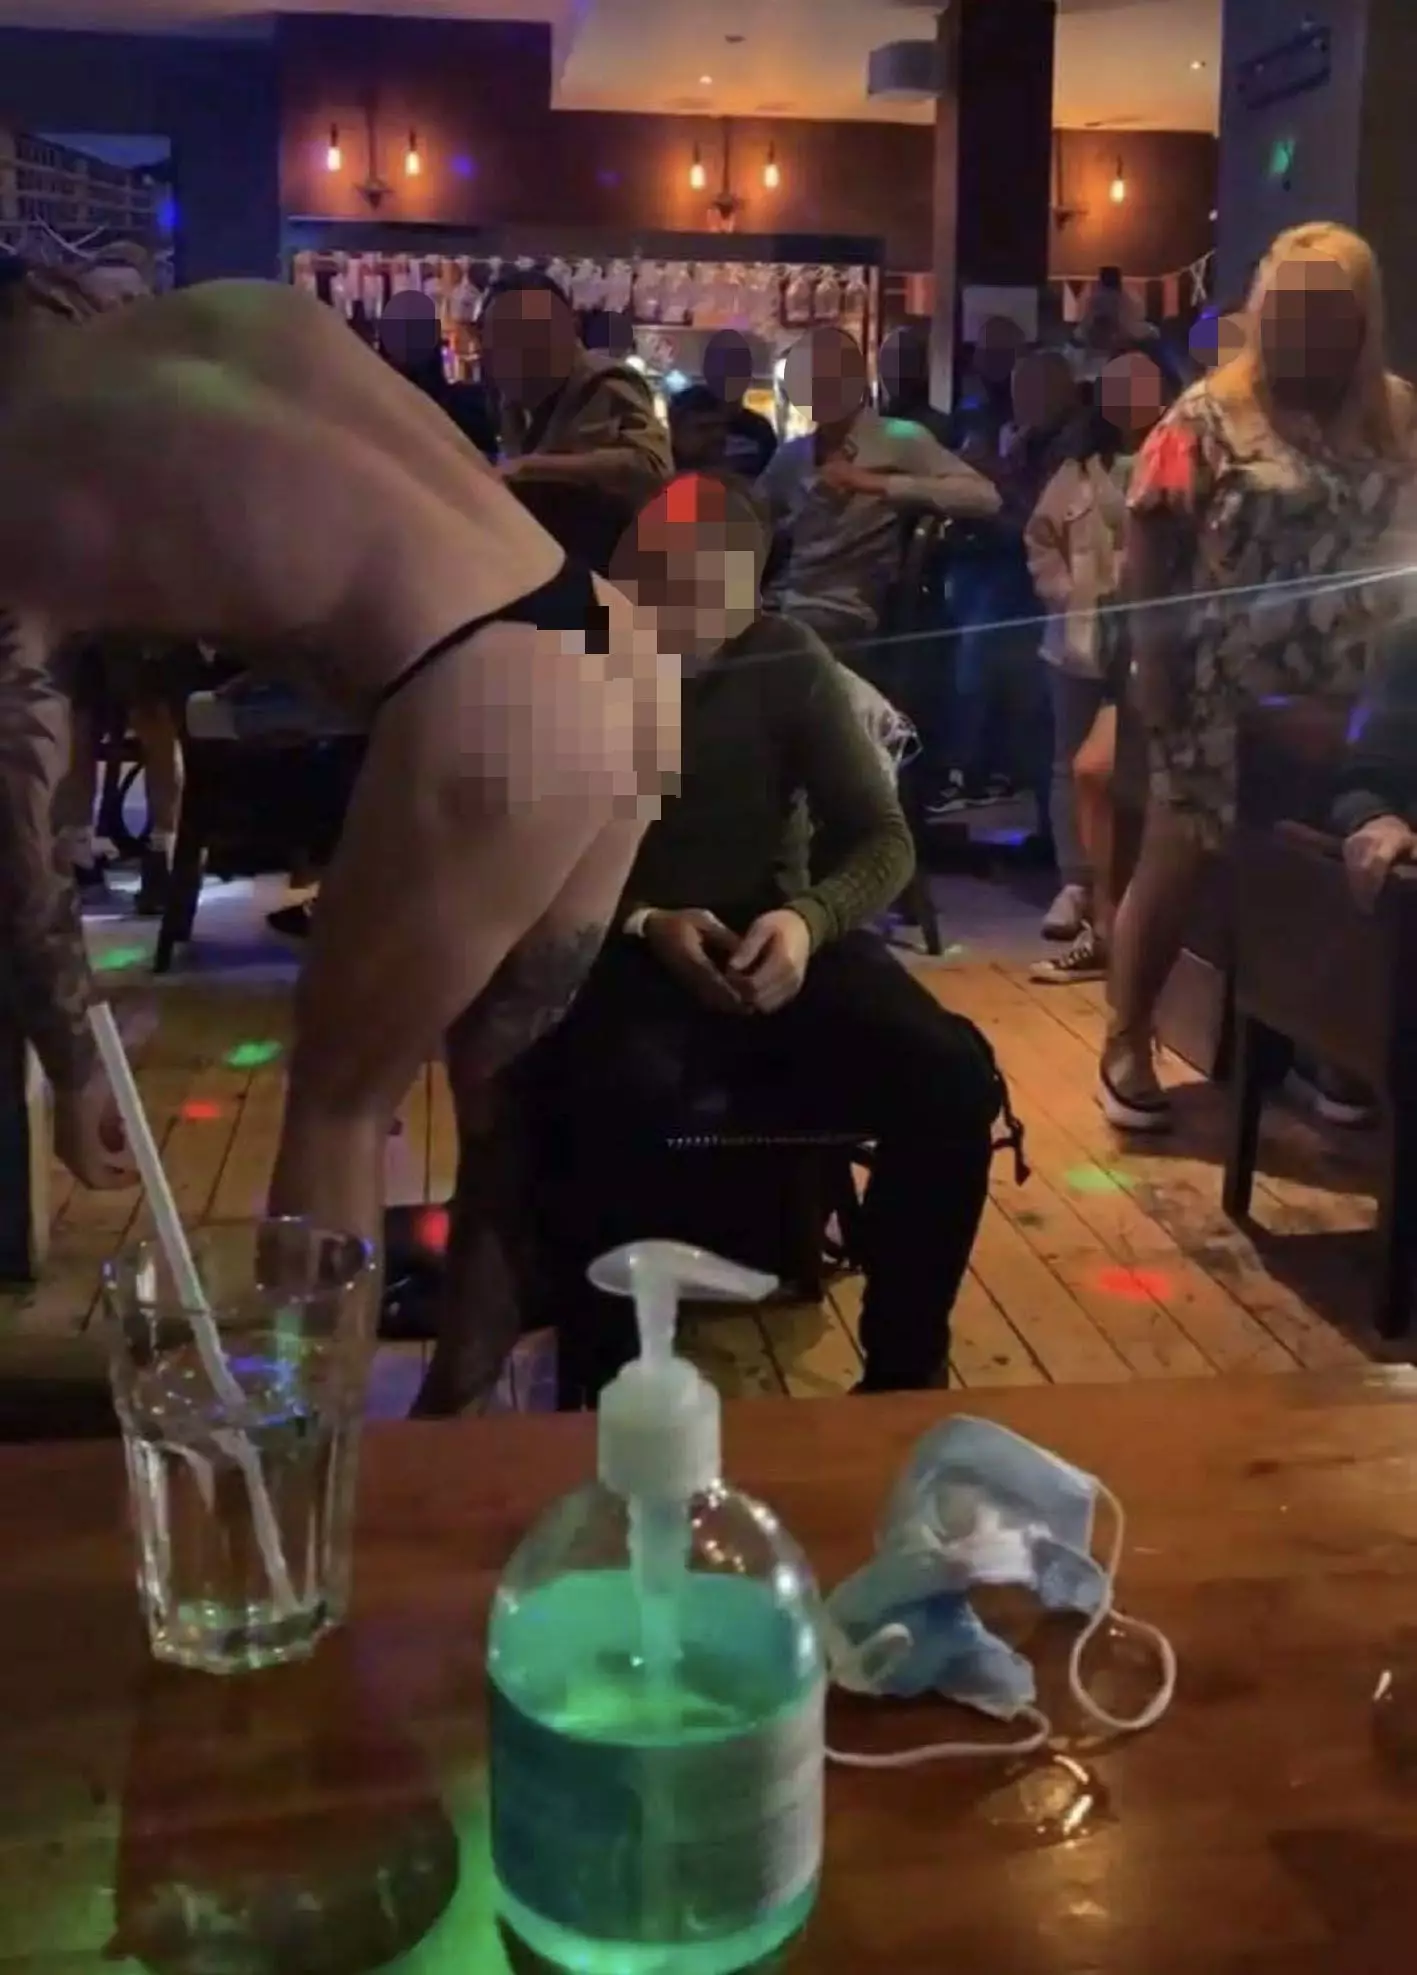 A punter was pictured licking whipped cream off a stripper's bum.